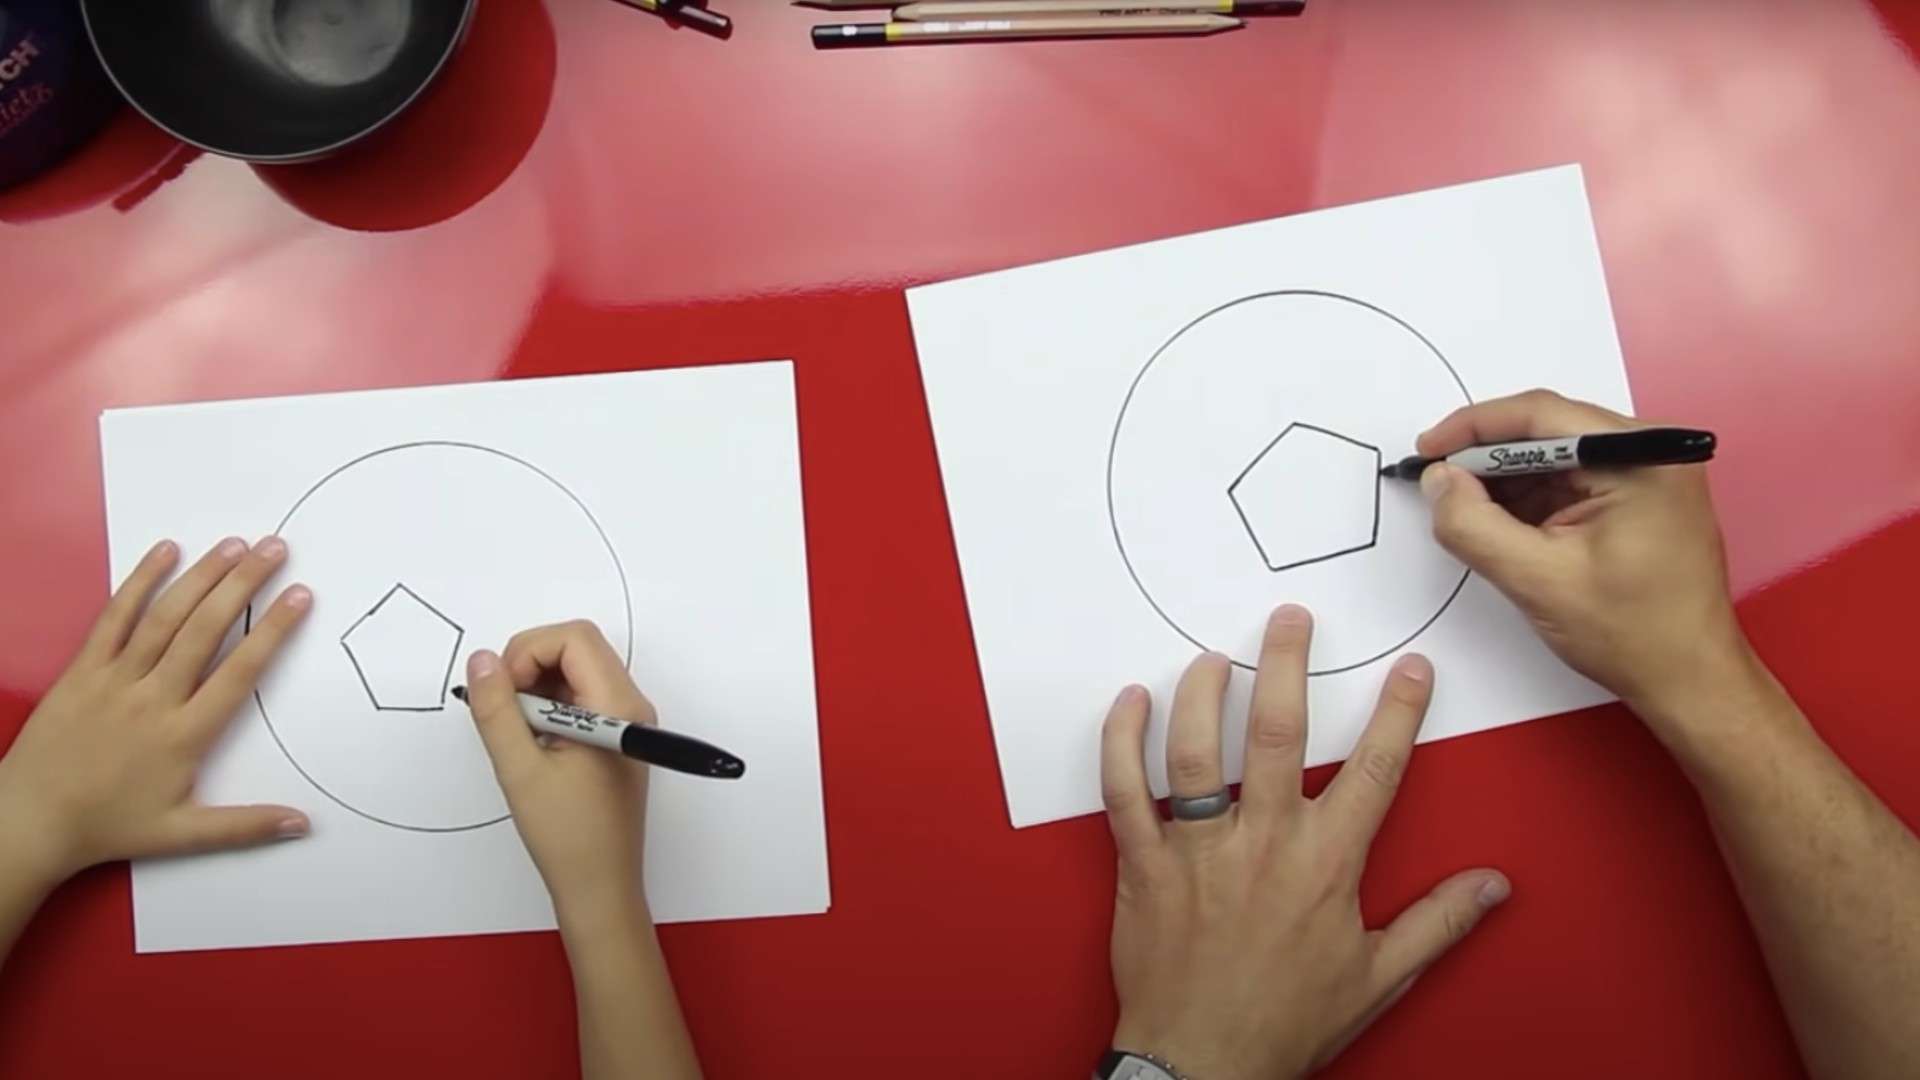 How to draw soccer ball 2